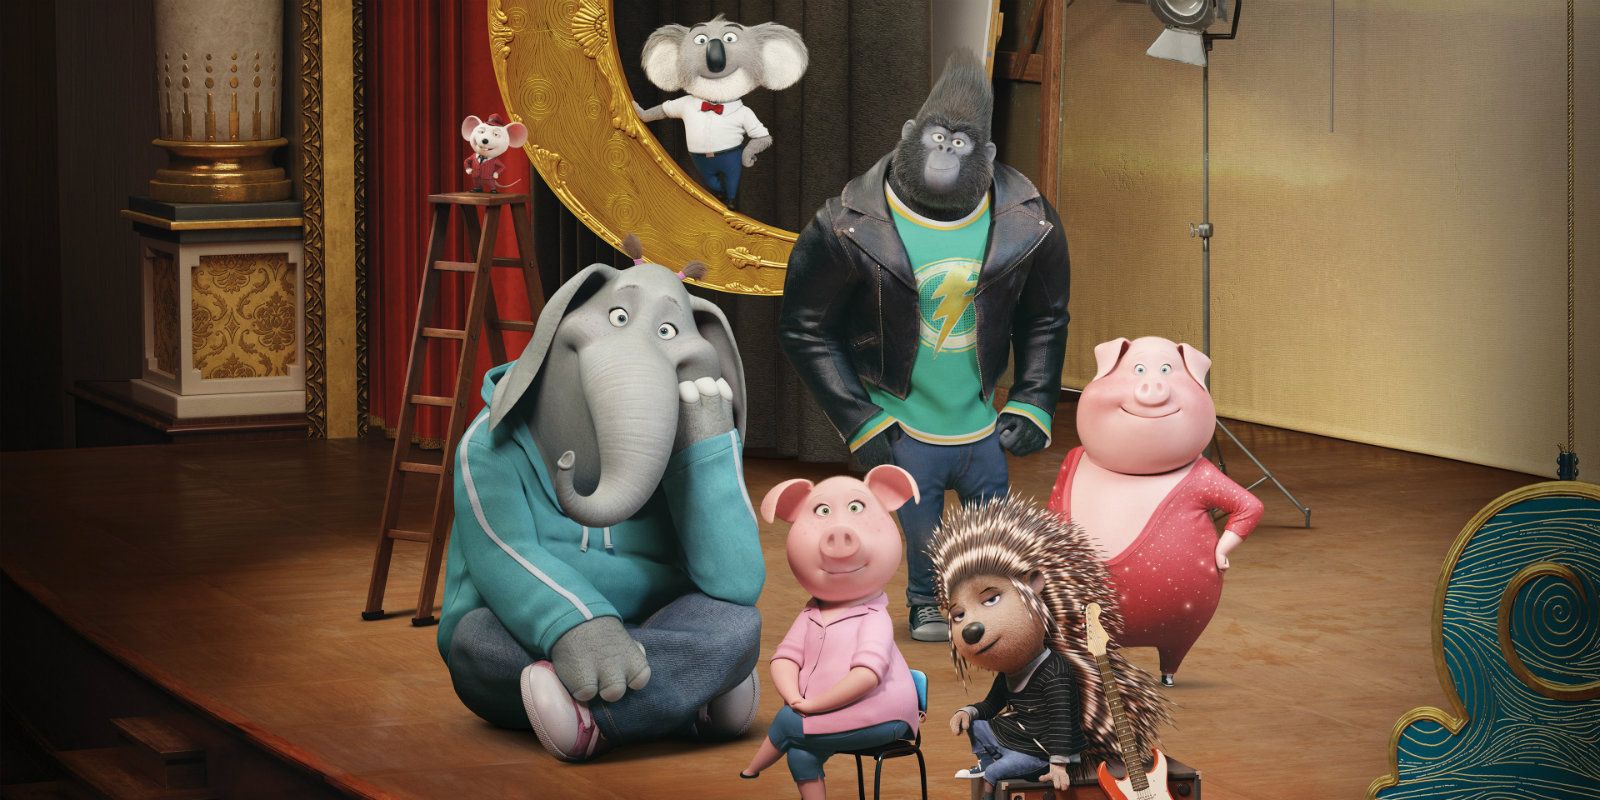 The main characters of Sing posing together on stage